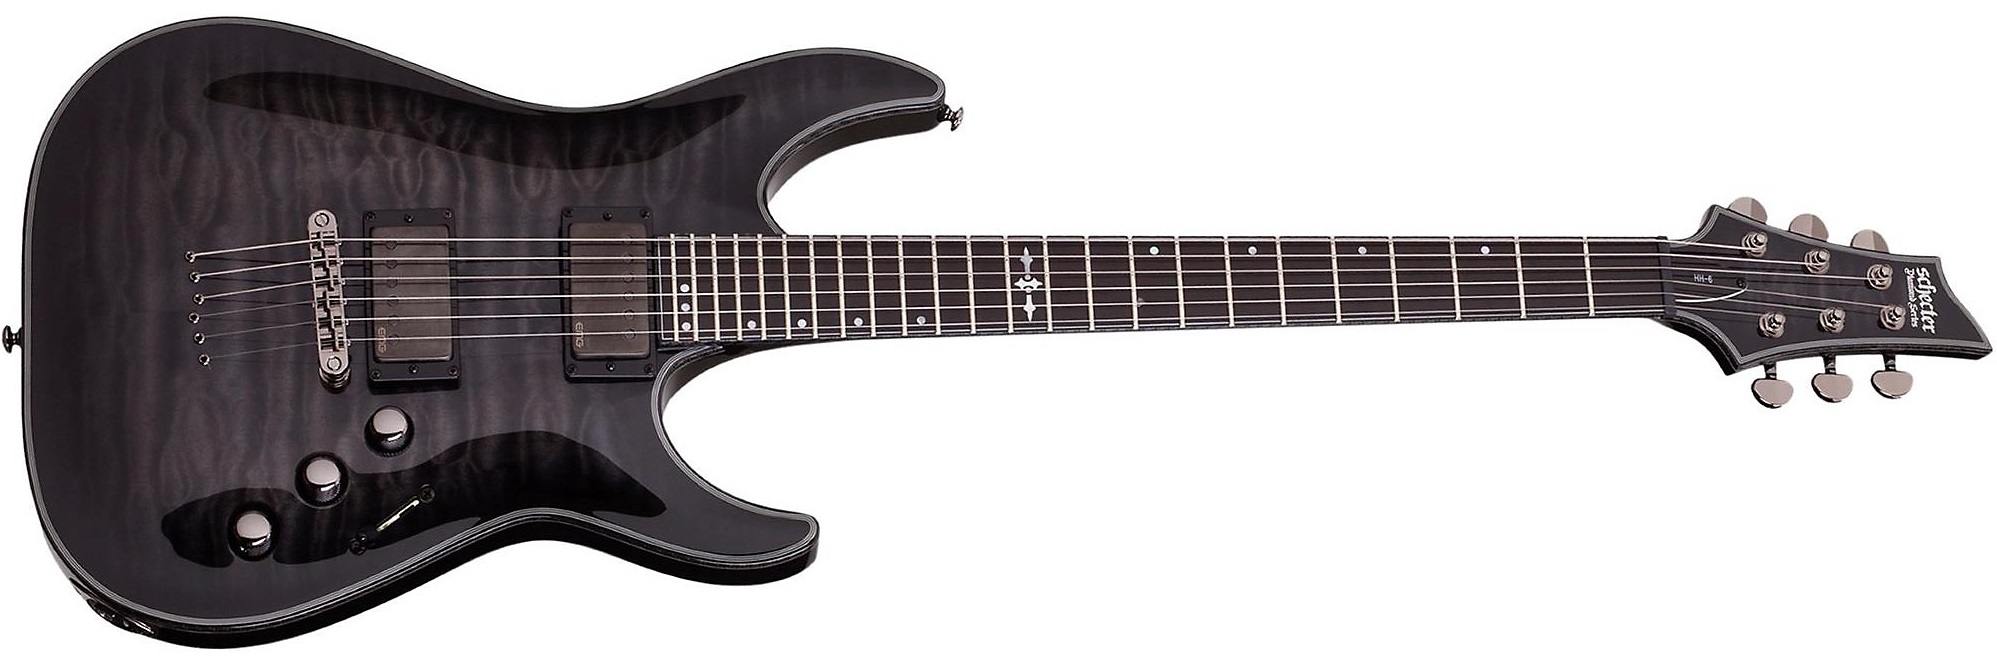 Schecter Hellraiser Hybrid C-1 Electric Guitar on a white background